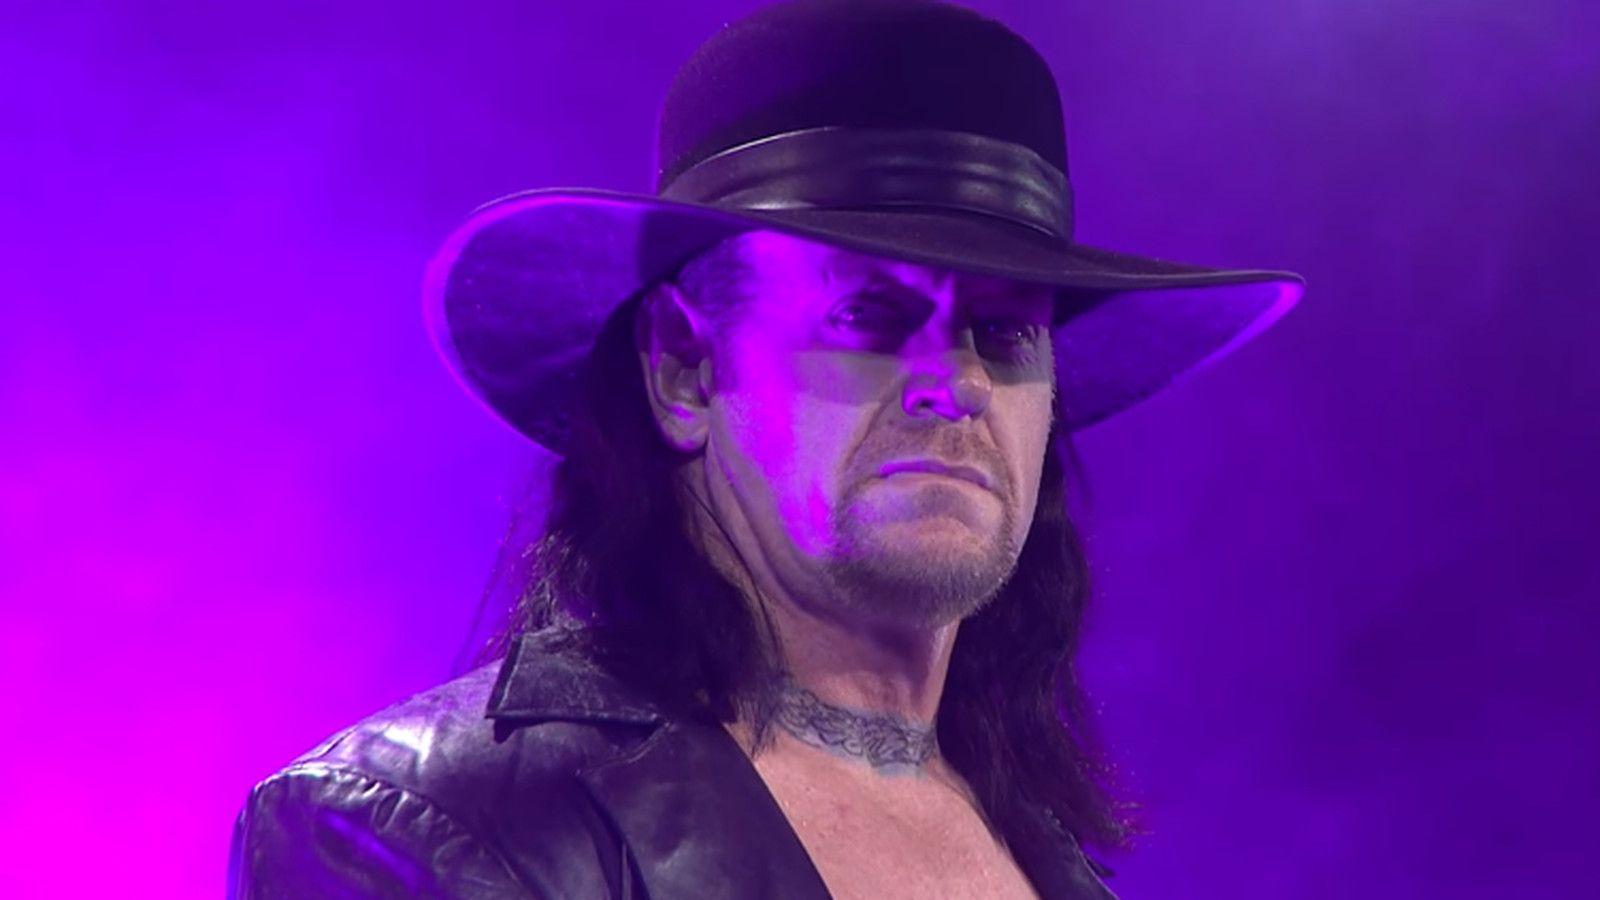 Here's video of Undertaker at the WrestleMania 34 press conference